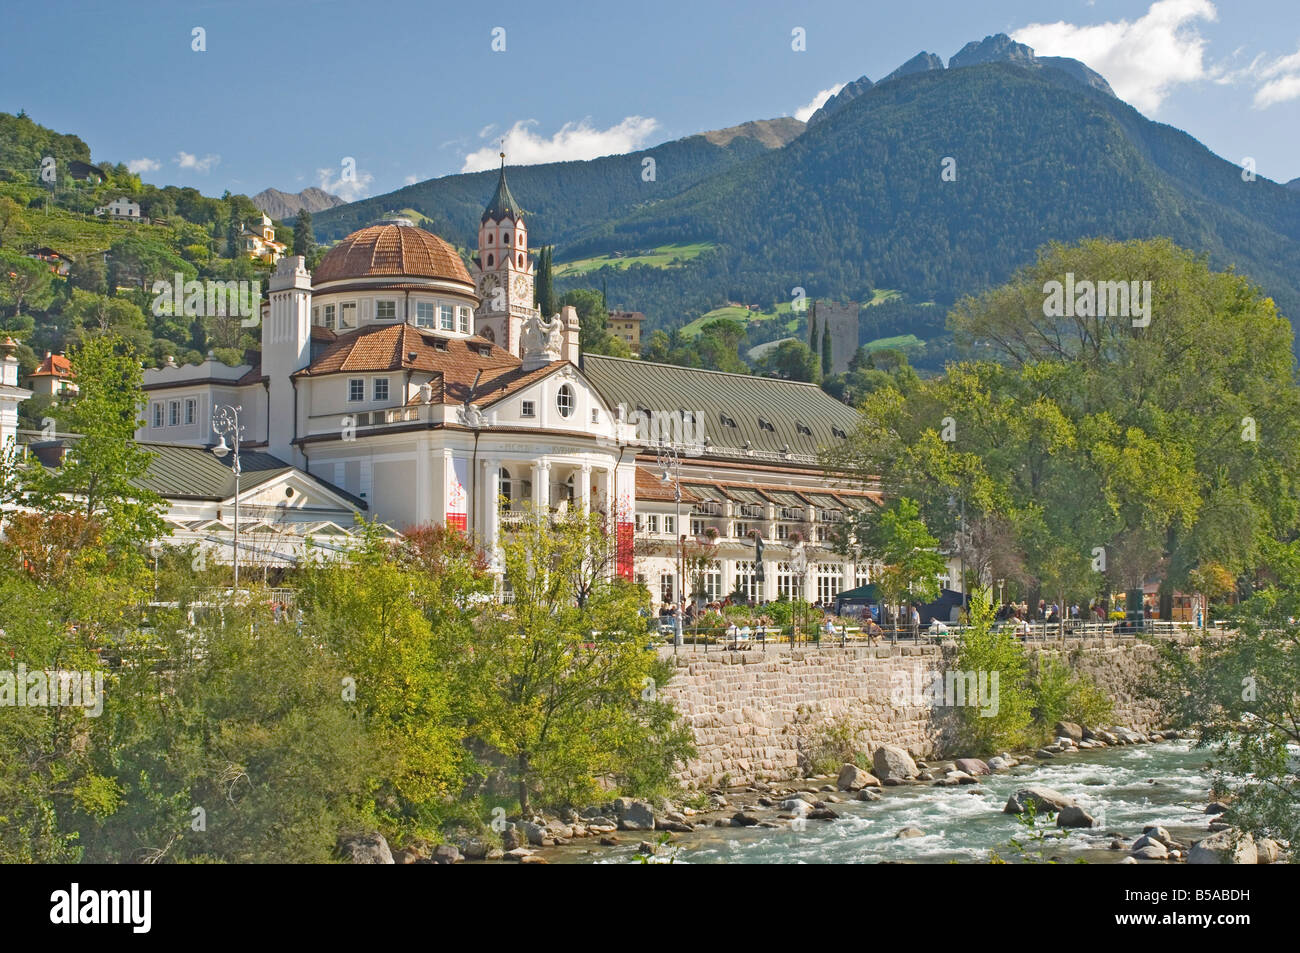 Civic centre and concert venue, Merano, Sud Tyrol, Western Dolomites, Italy, Europe Stock Photo